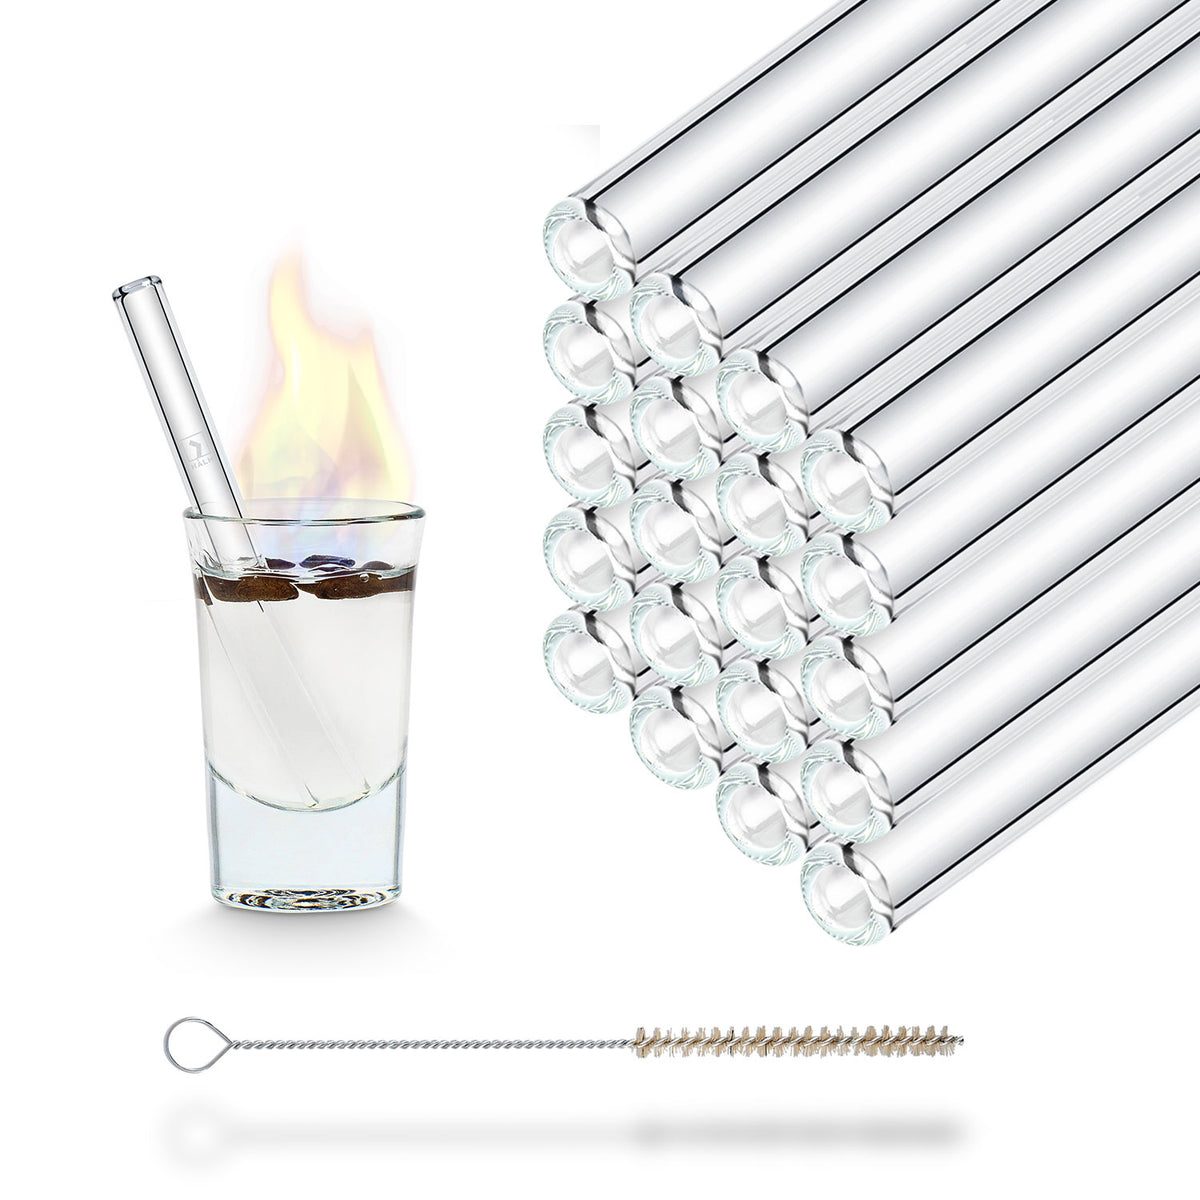 What are Shot Straws?